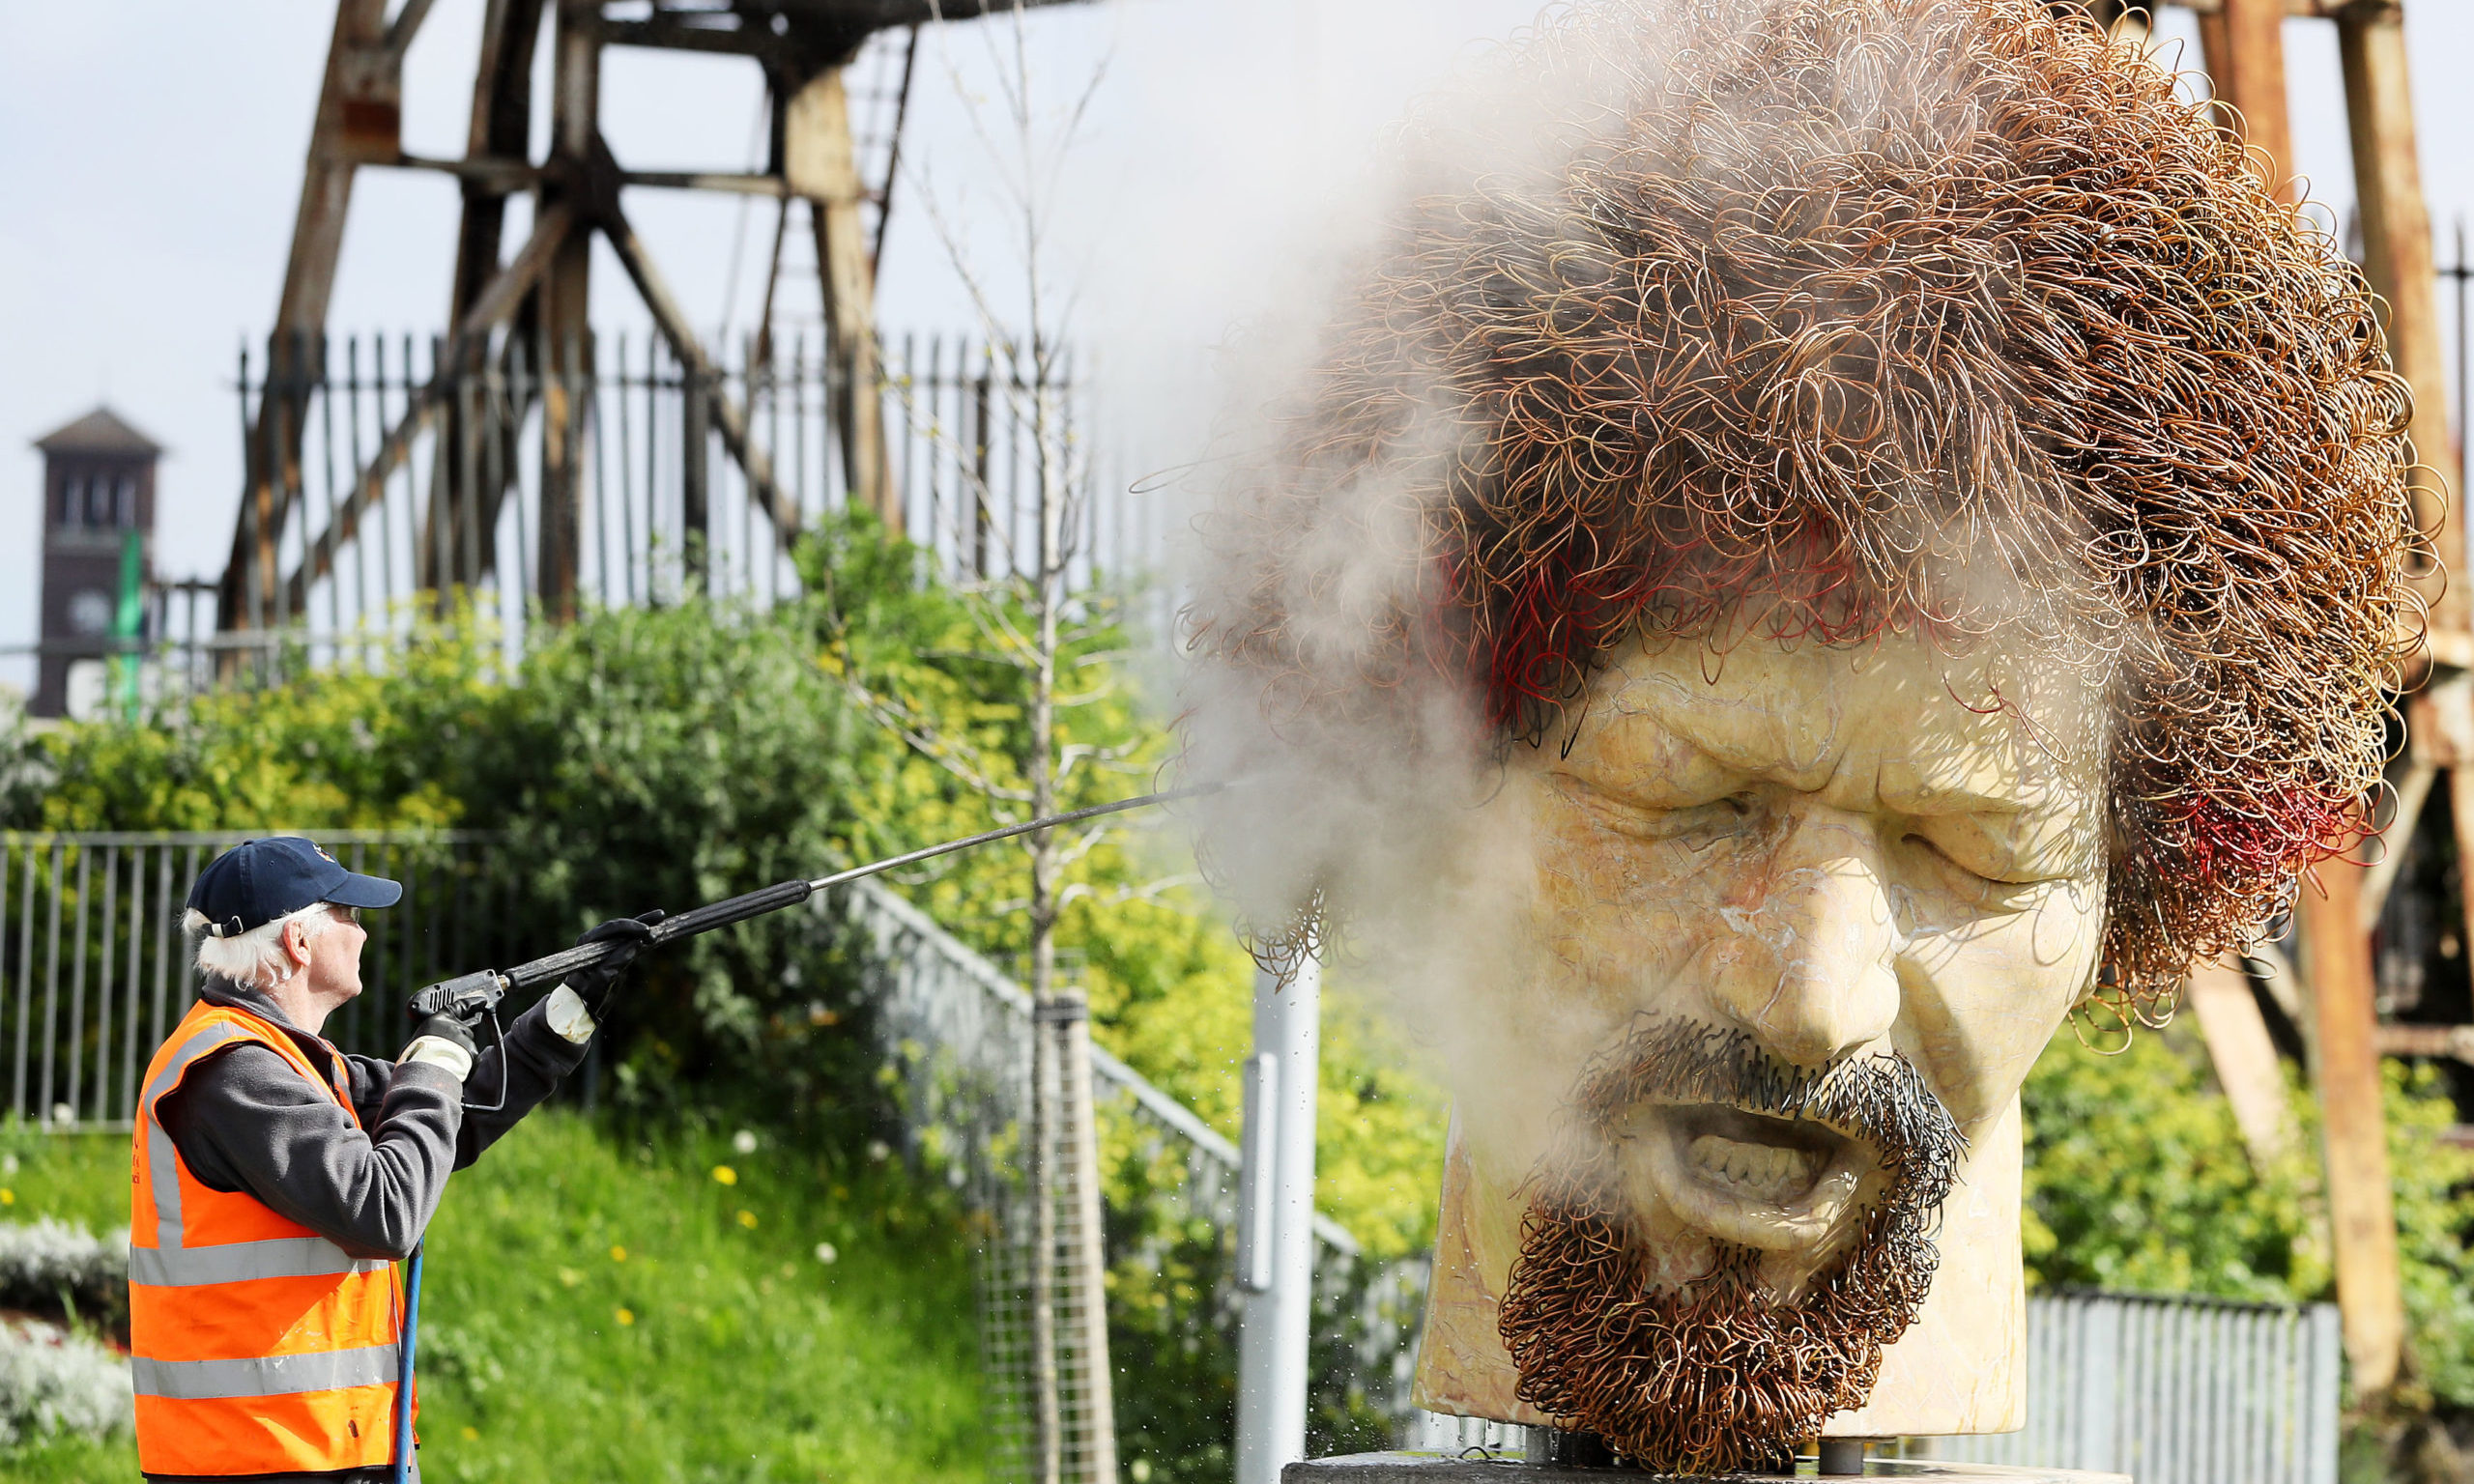 Ross Sheridan of P.Mac Cleaning and Restoration services working on behalf of Dublin City Council cleans a statue of the late musician Luke Kelly in the Sherriff street area of Dublin, after it was defaced for the fourth time in the past year.